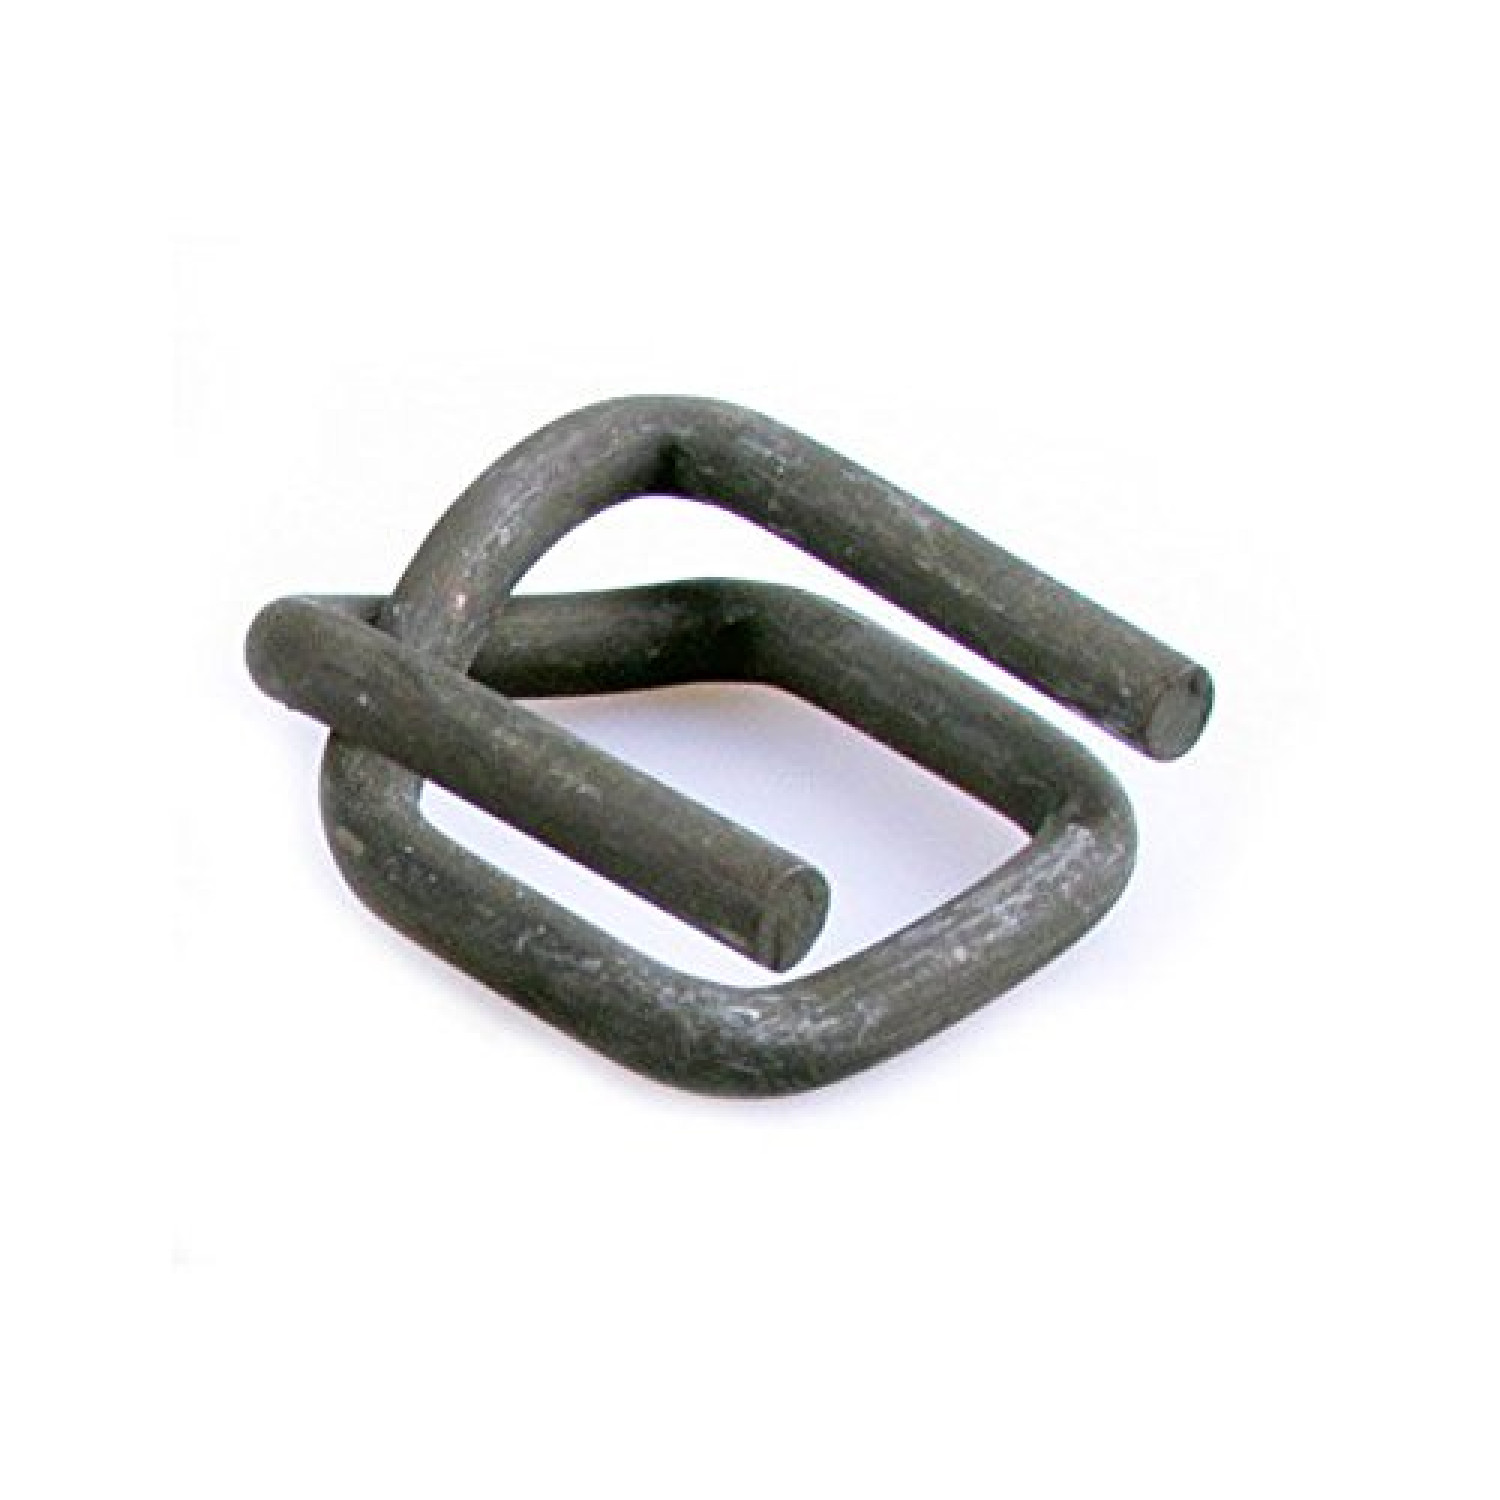 Type 201 3/4 Stainless Steel Strapping Buckles